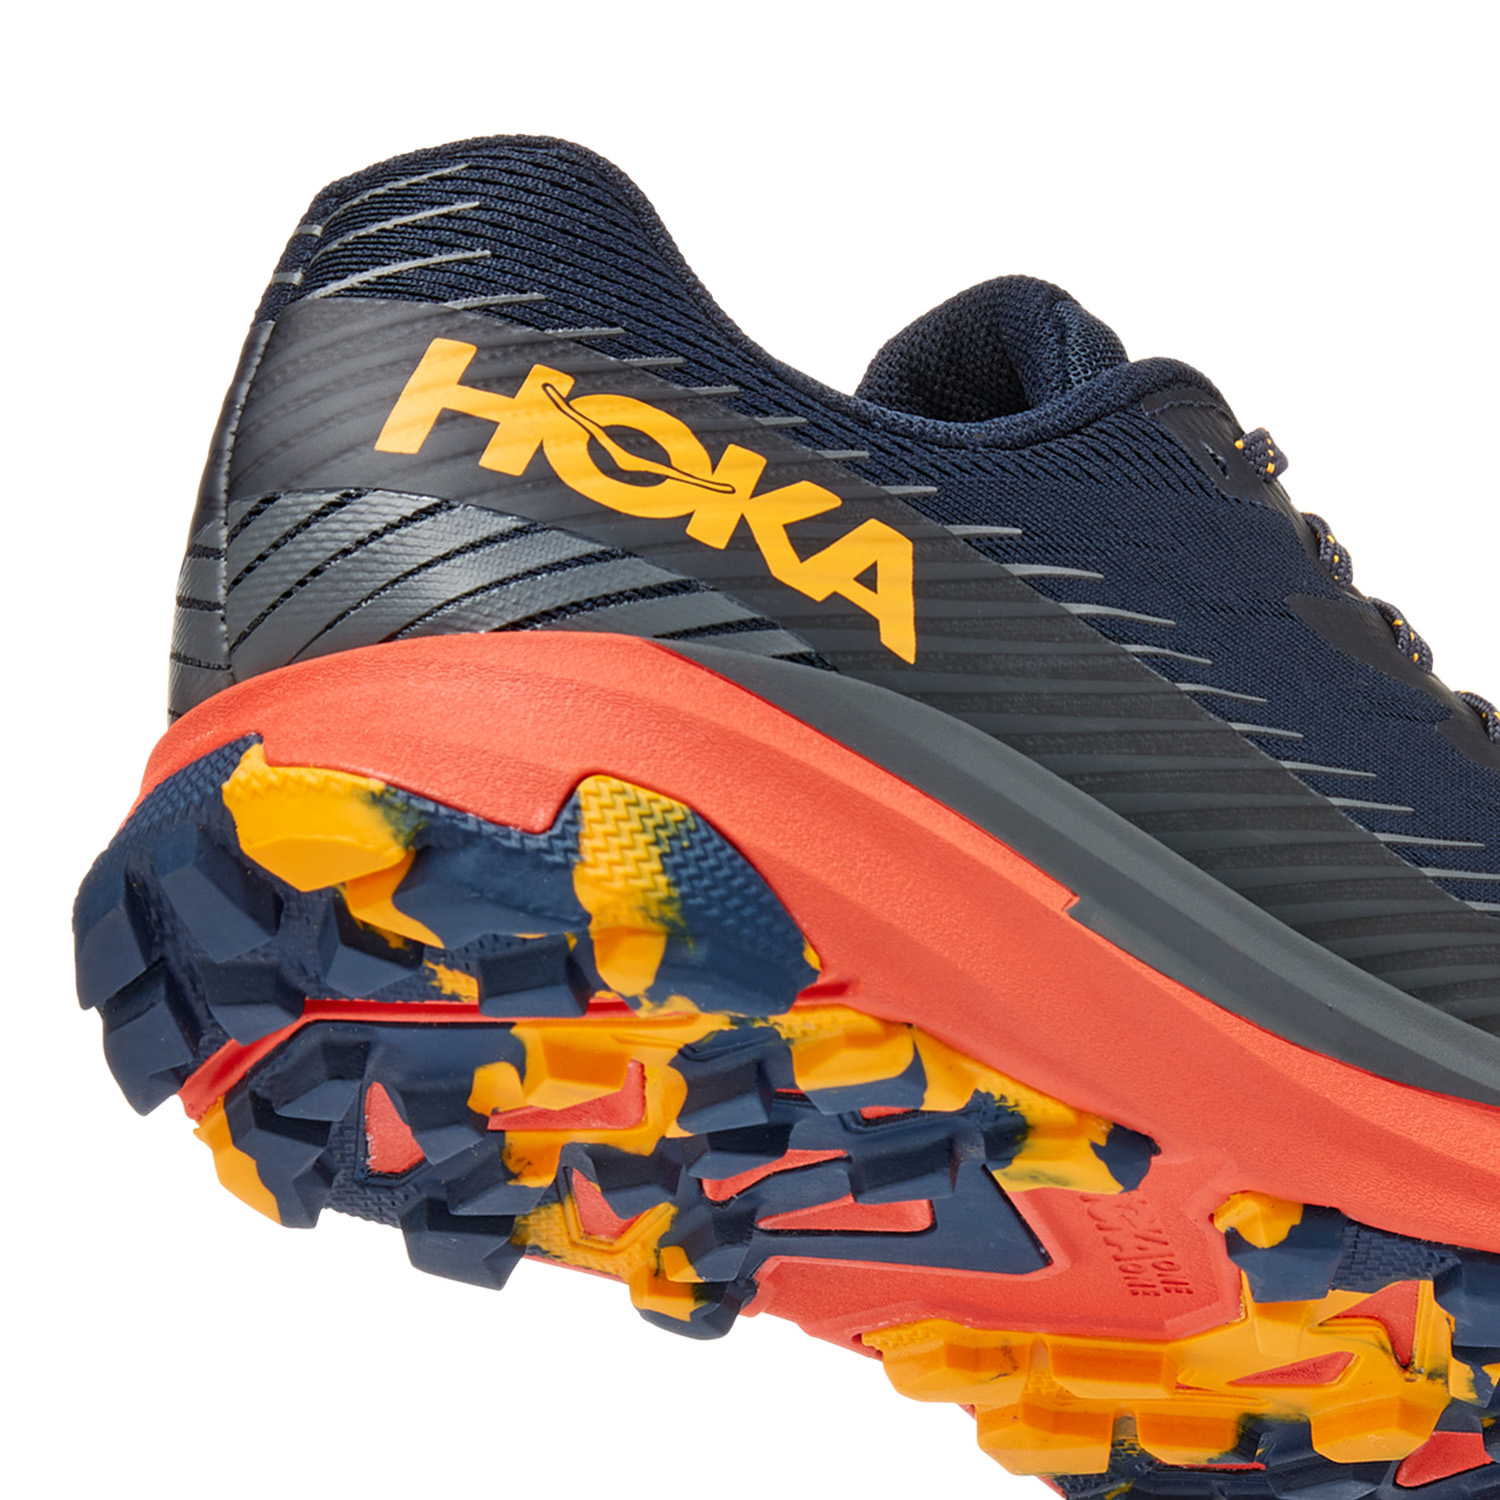 Hoka One One Torrent 2 - Outer Space/Fiesta